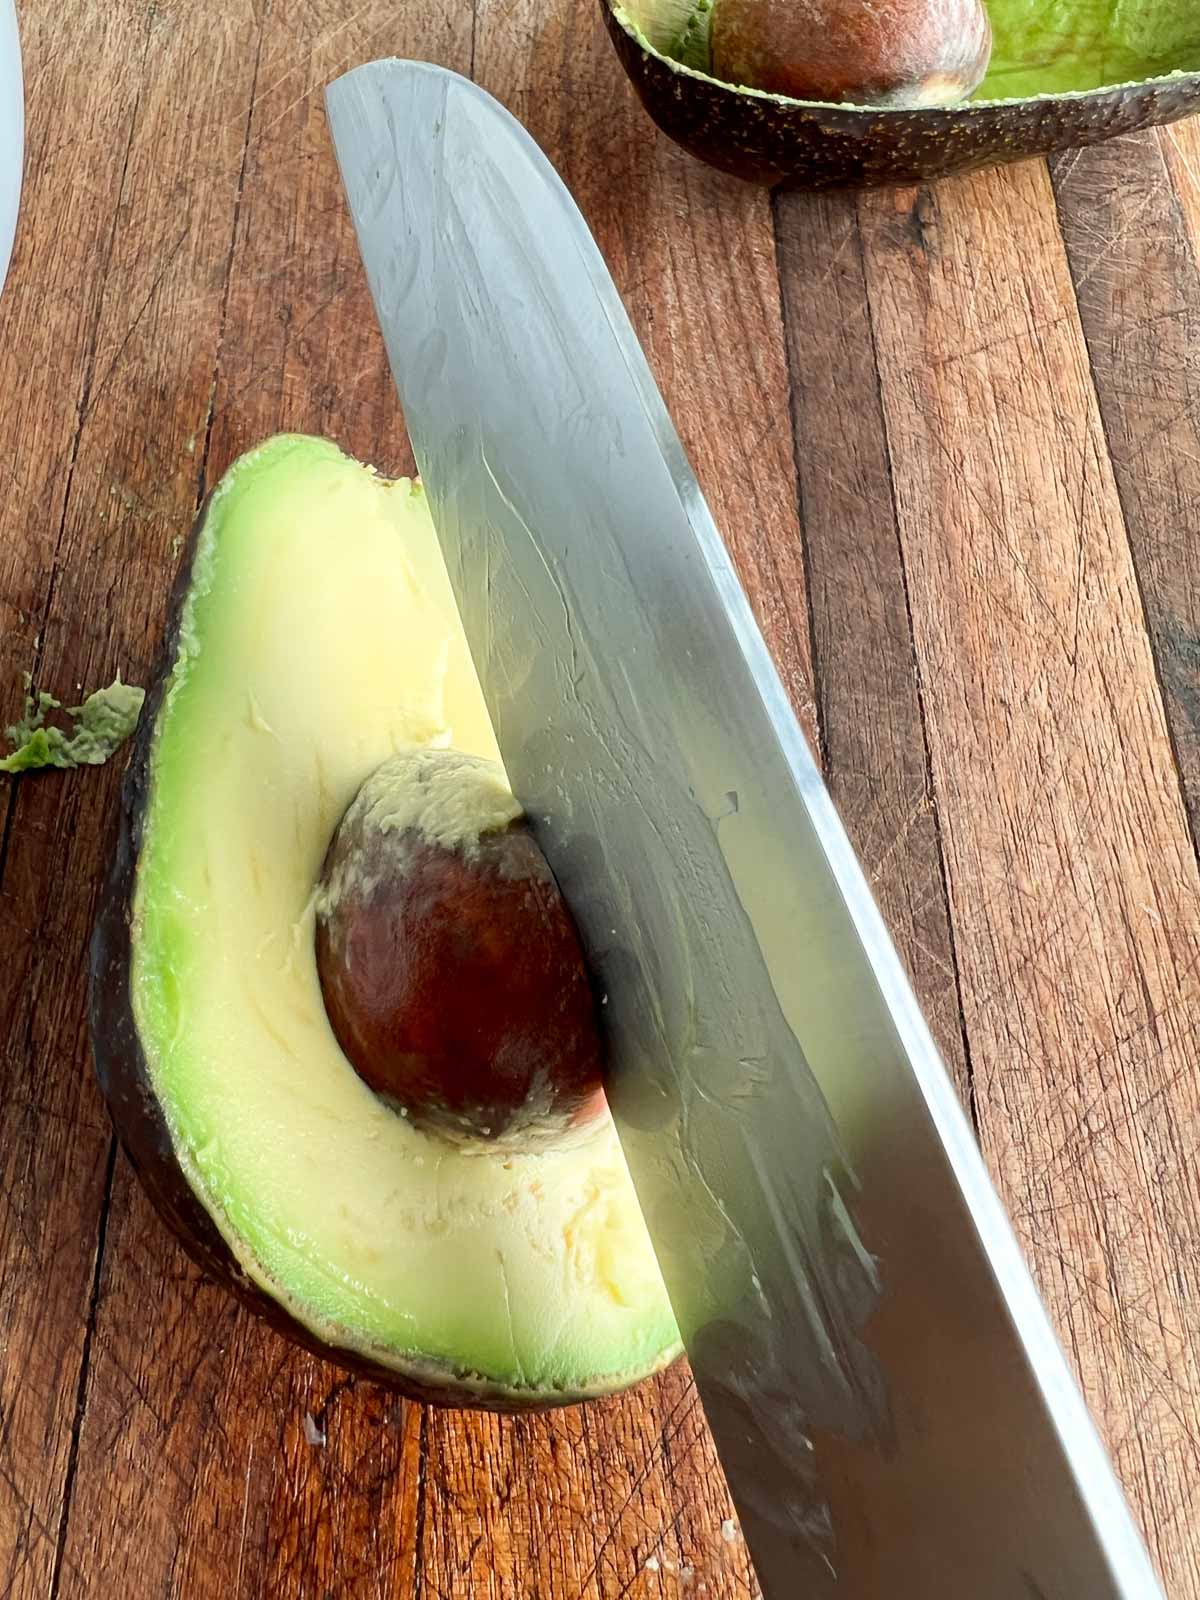 Knife removing pit from the pit from an avocado